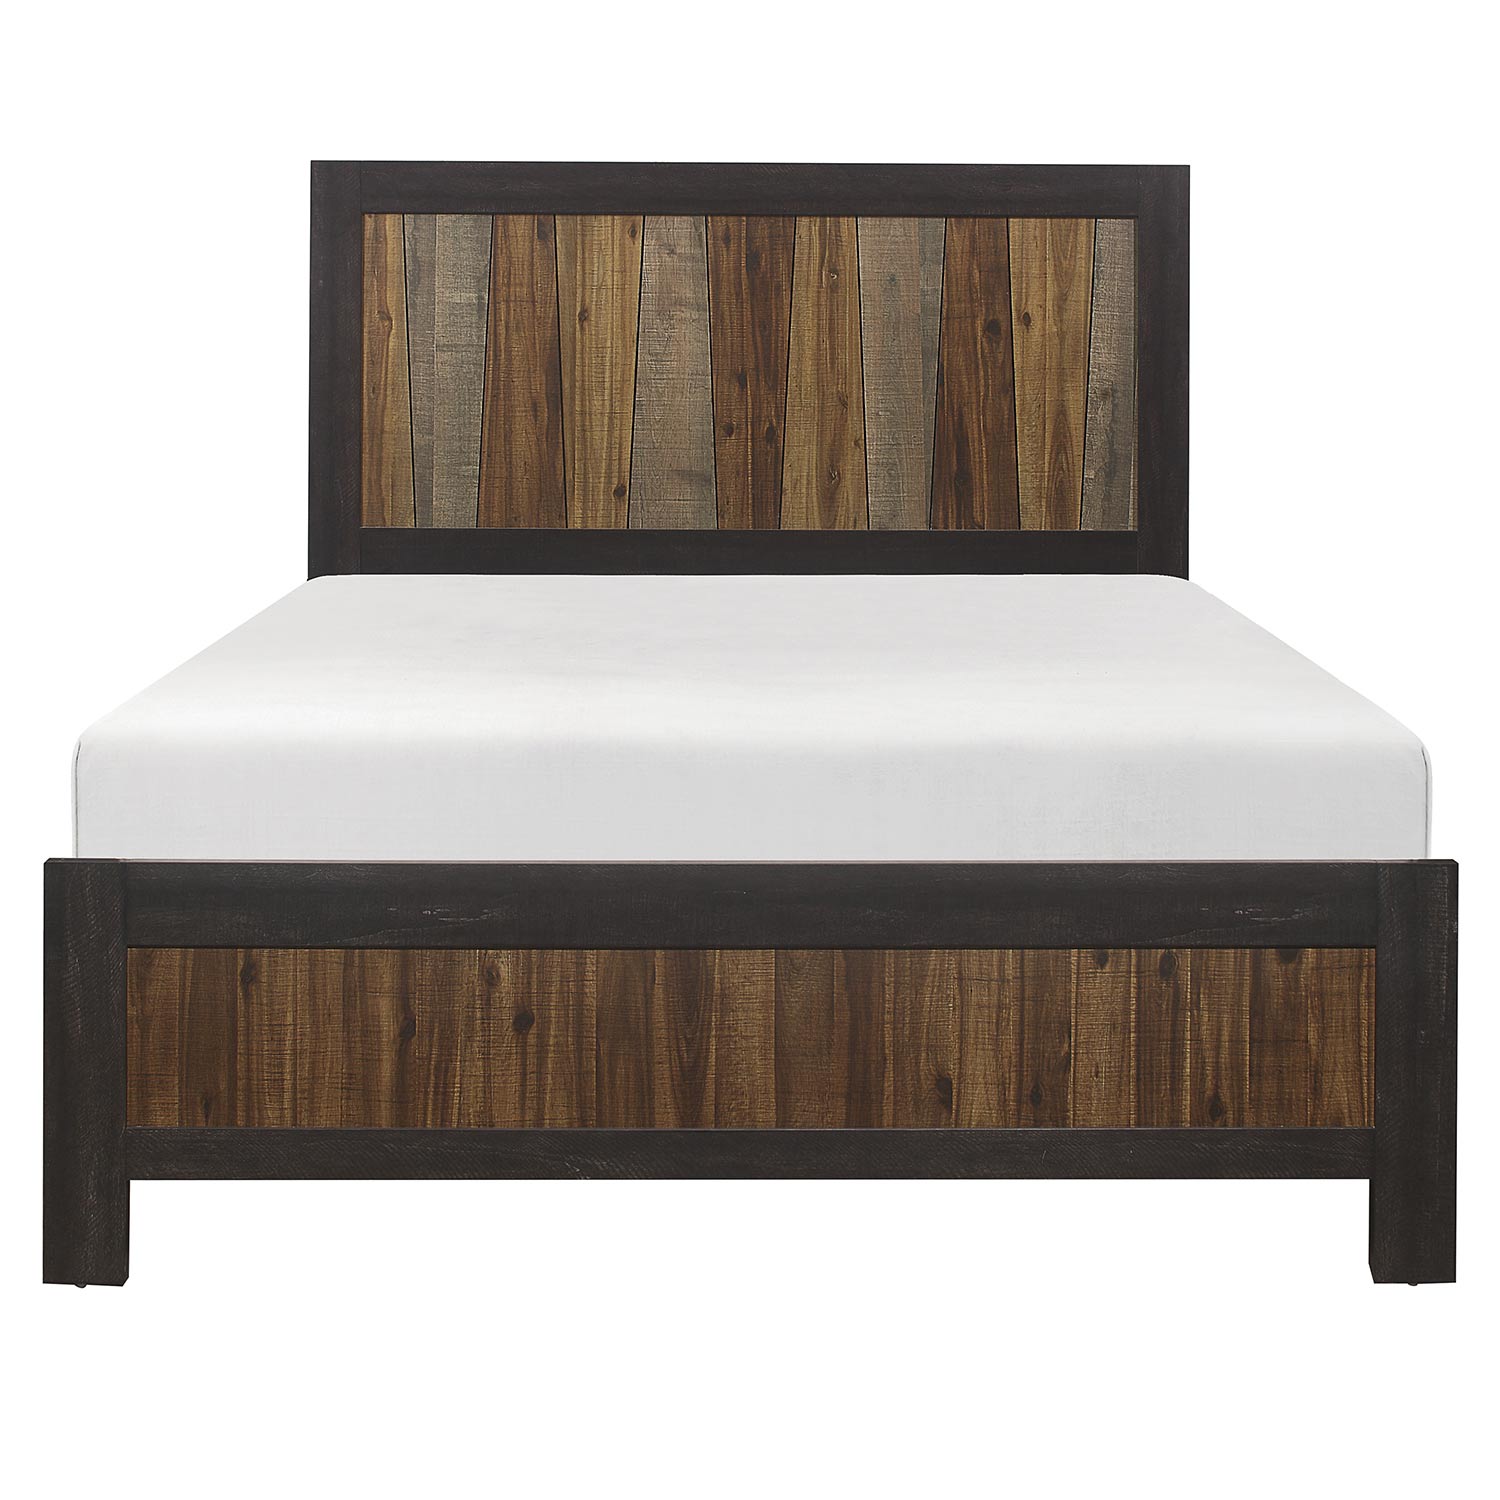 Homelegance Cooper Bed - Wire-brushed multi-tone